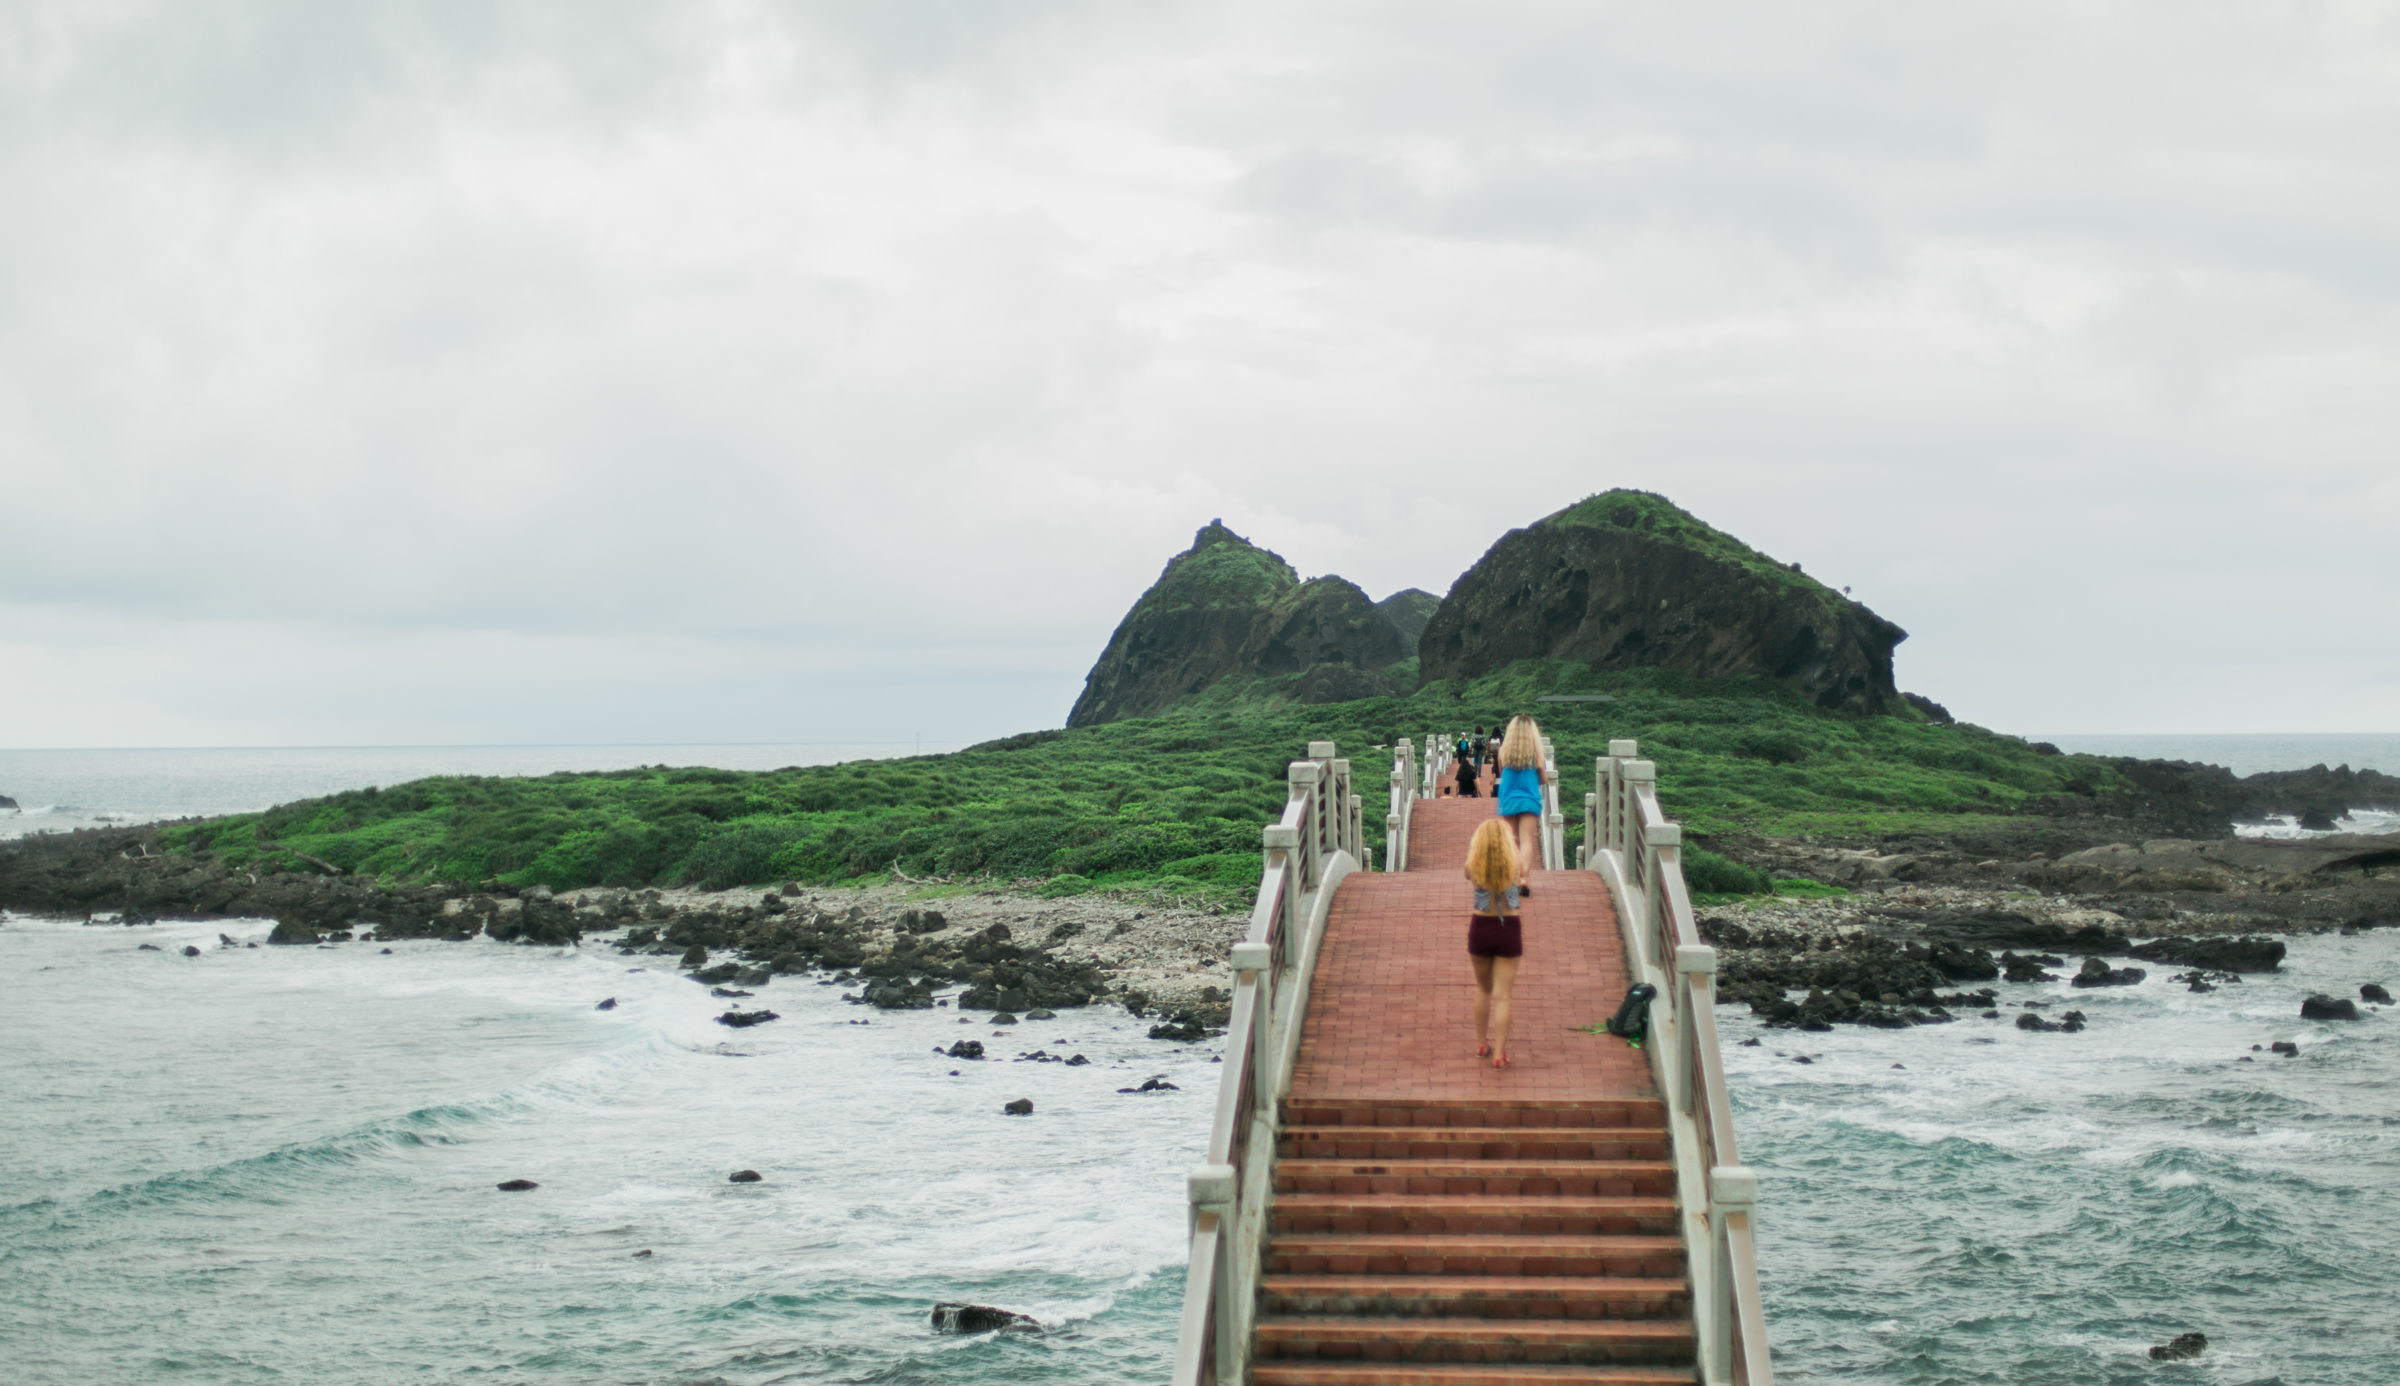 Students abroad in Taiwan cross a red bridge to a small island.